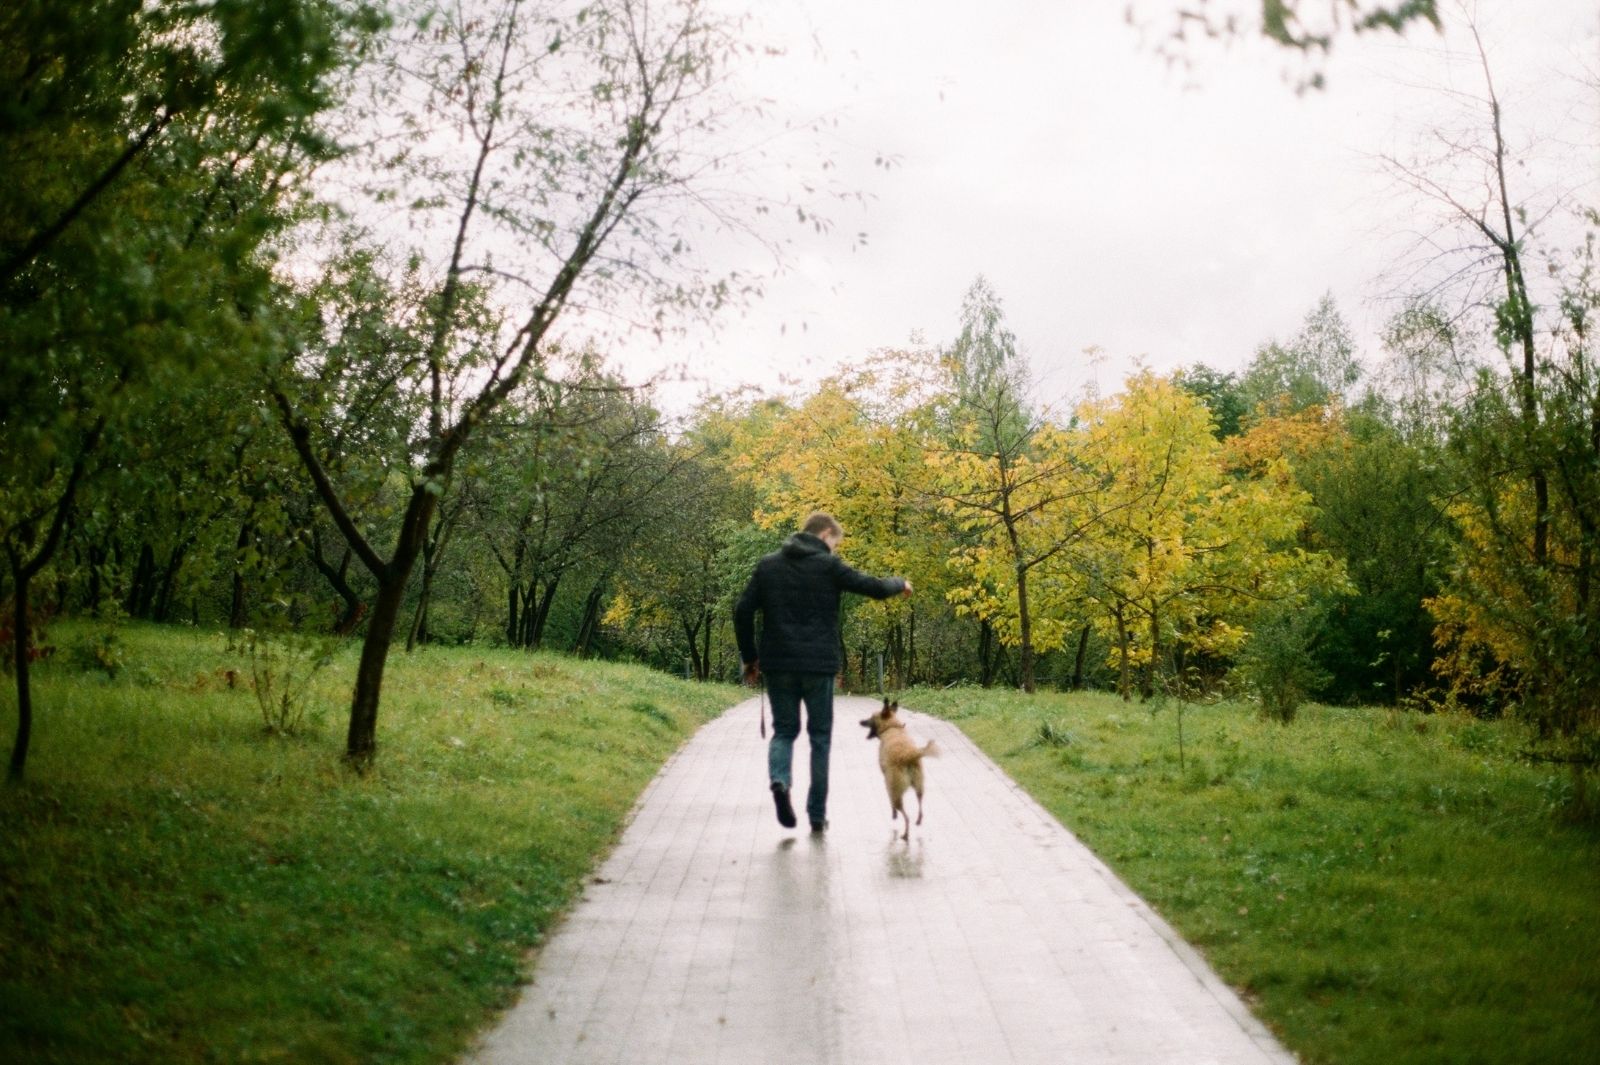 Man walking a dog in a park